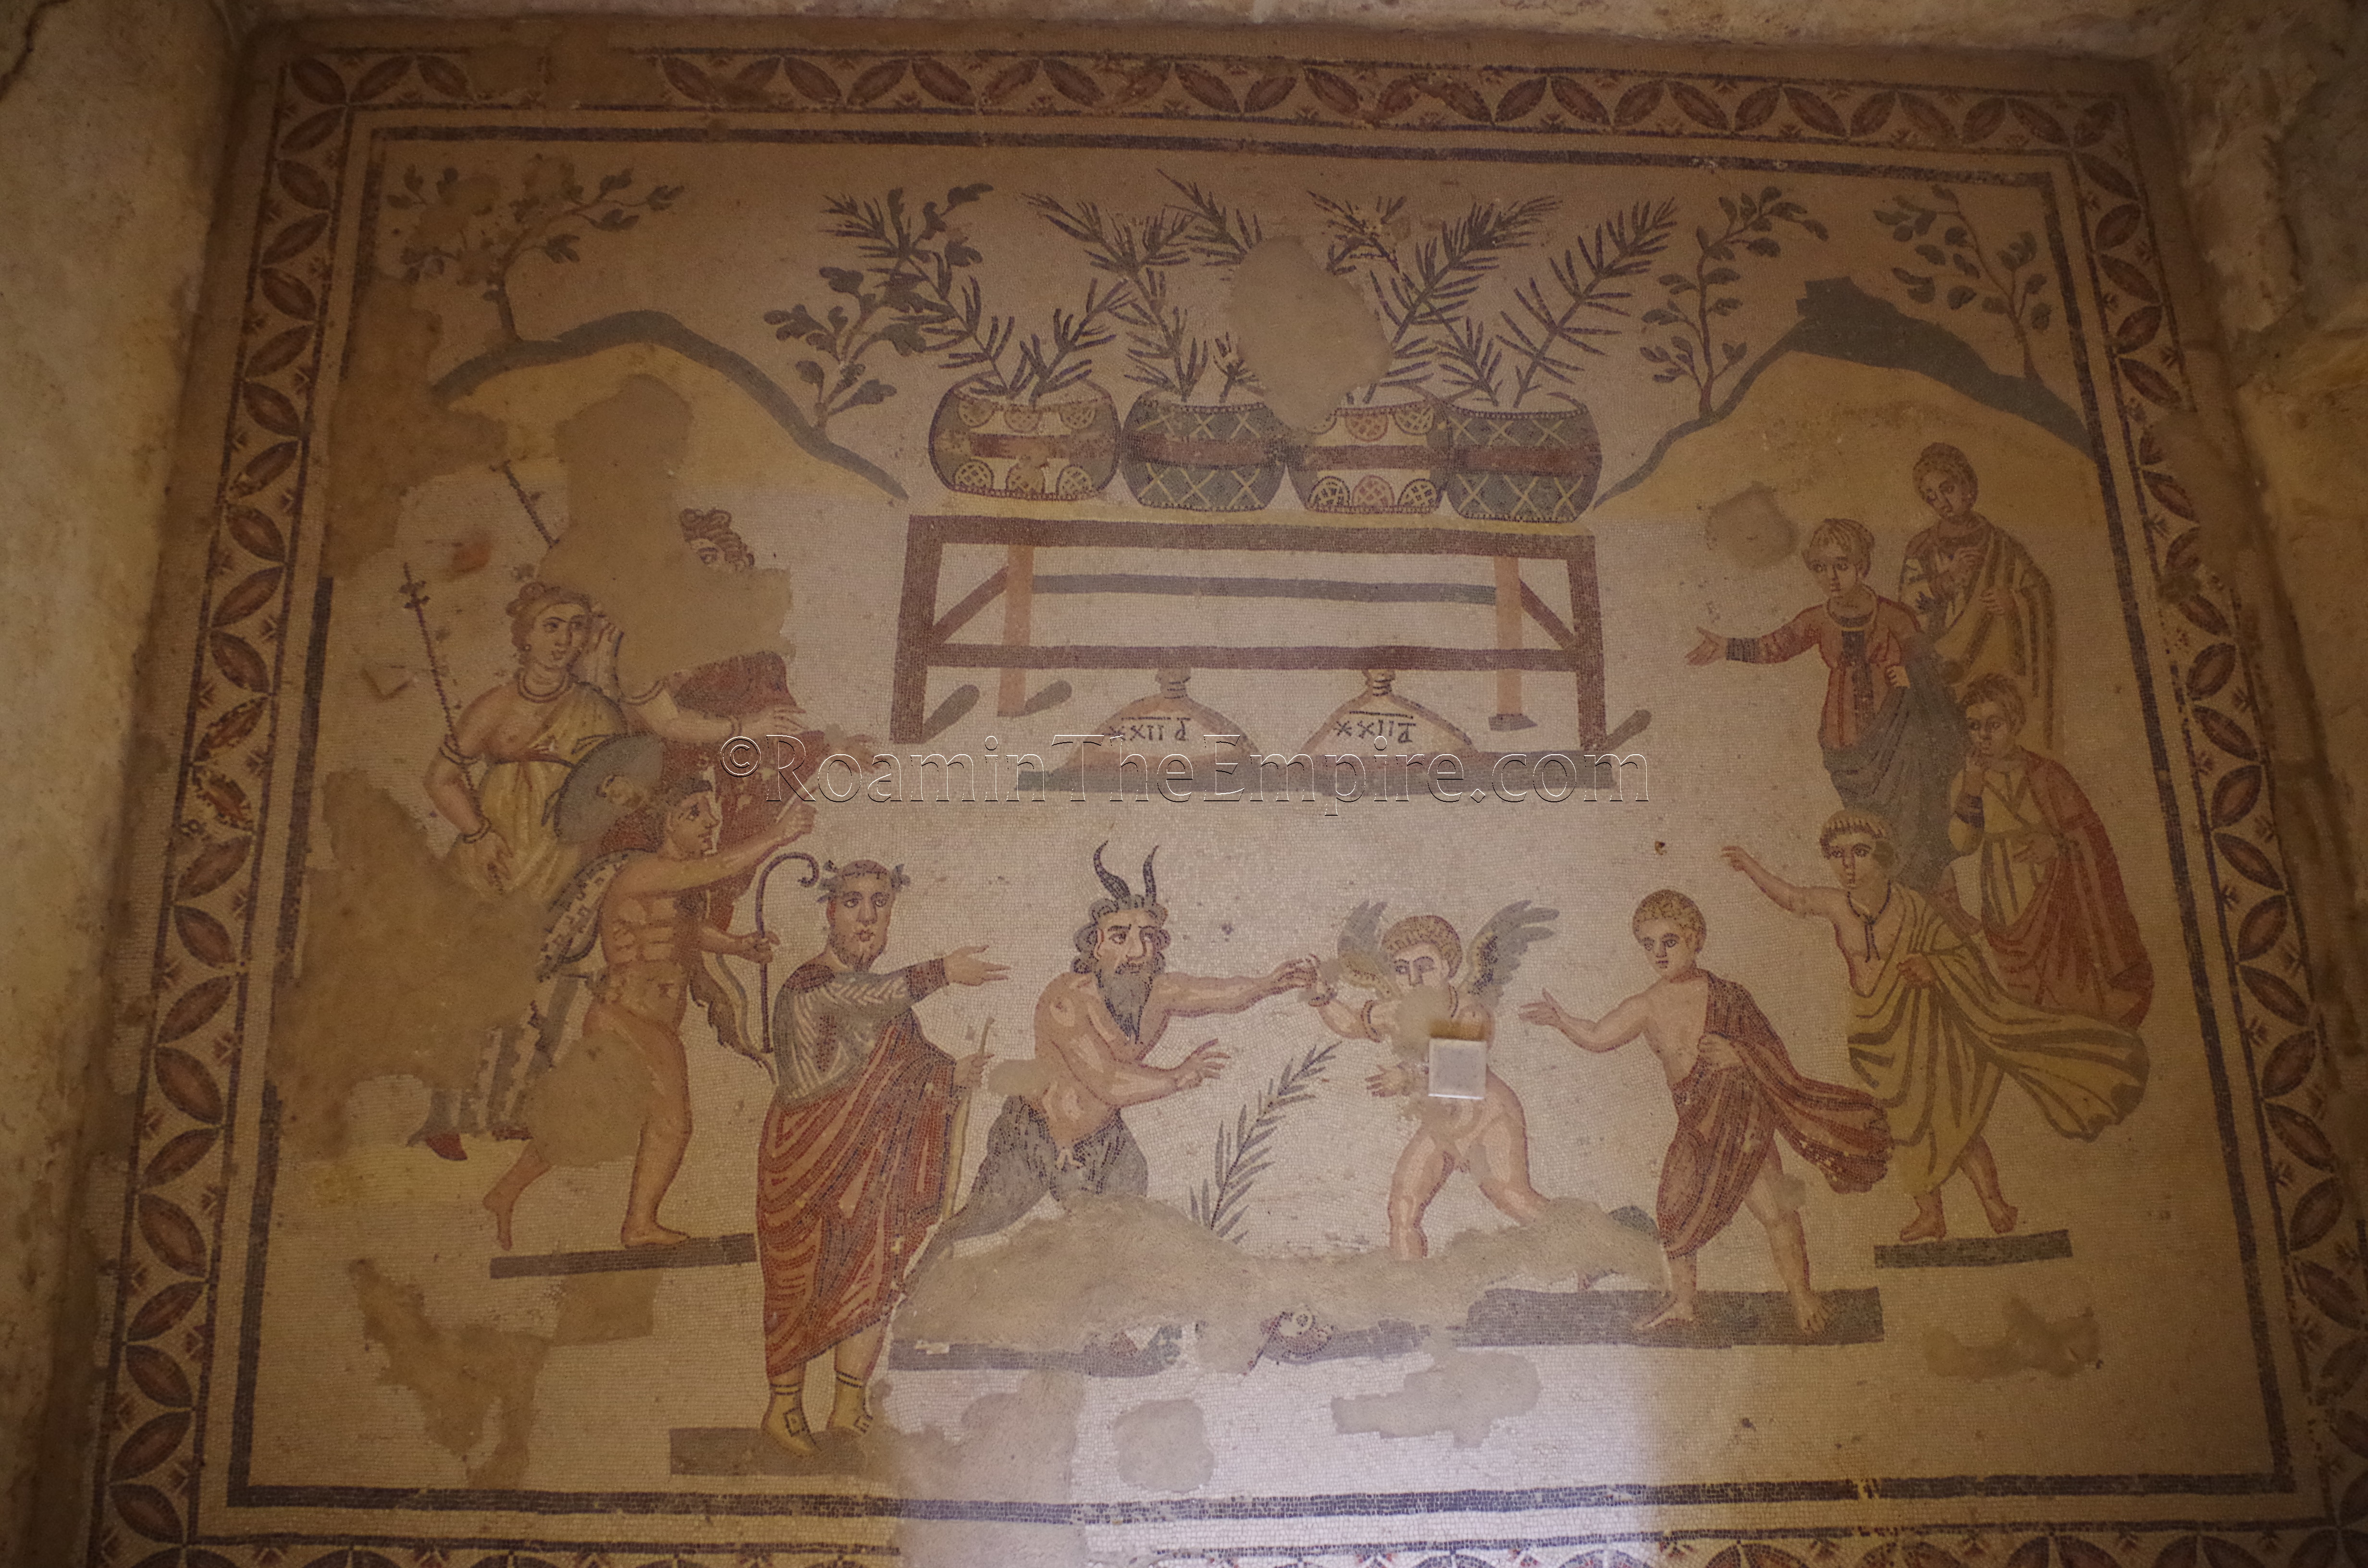 Antechamber of a cubiculum decorated with a contest between Pan and Eros, with Bacchic imagery present. The figures behind Eros are possibly those of the domina, her children, and a maidservent. Villa Romana del Casale.